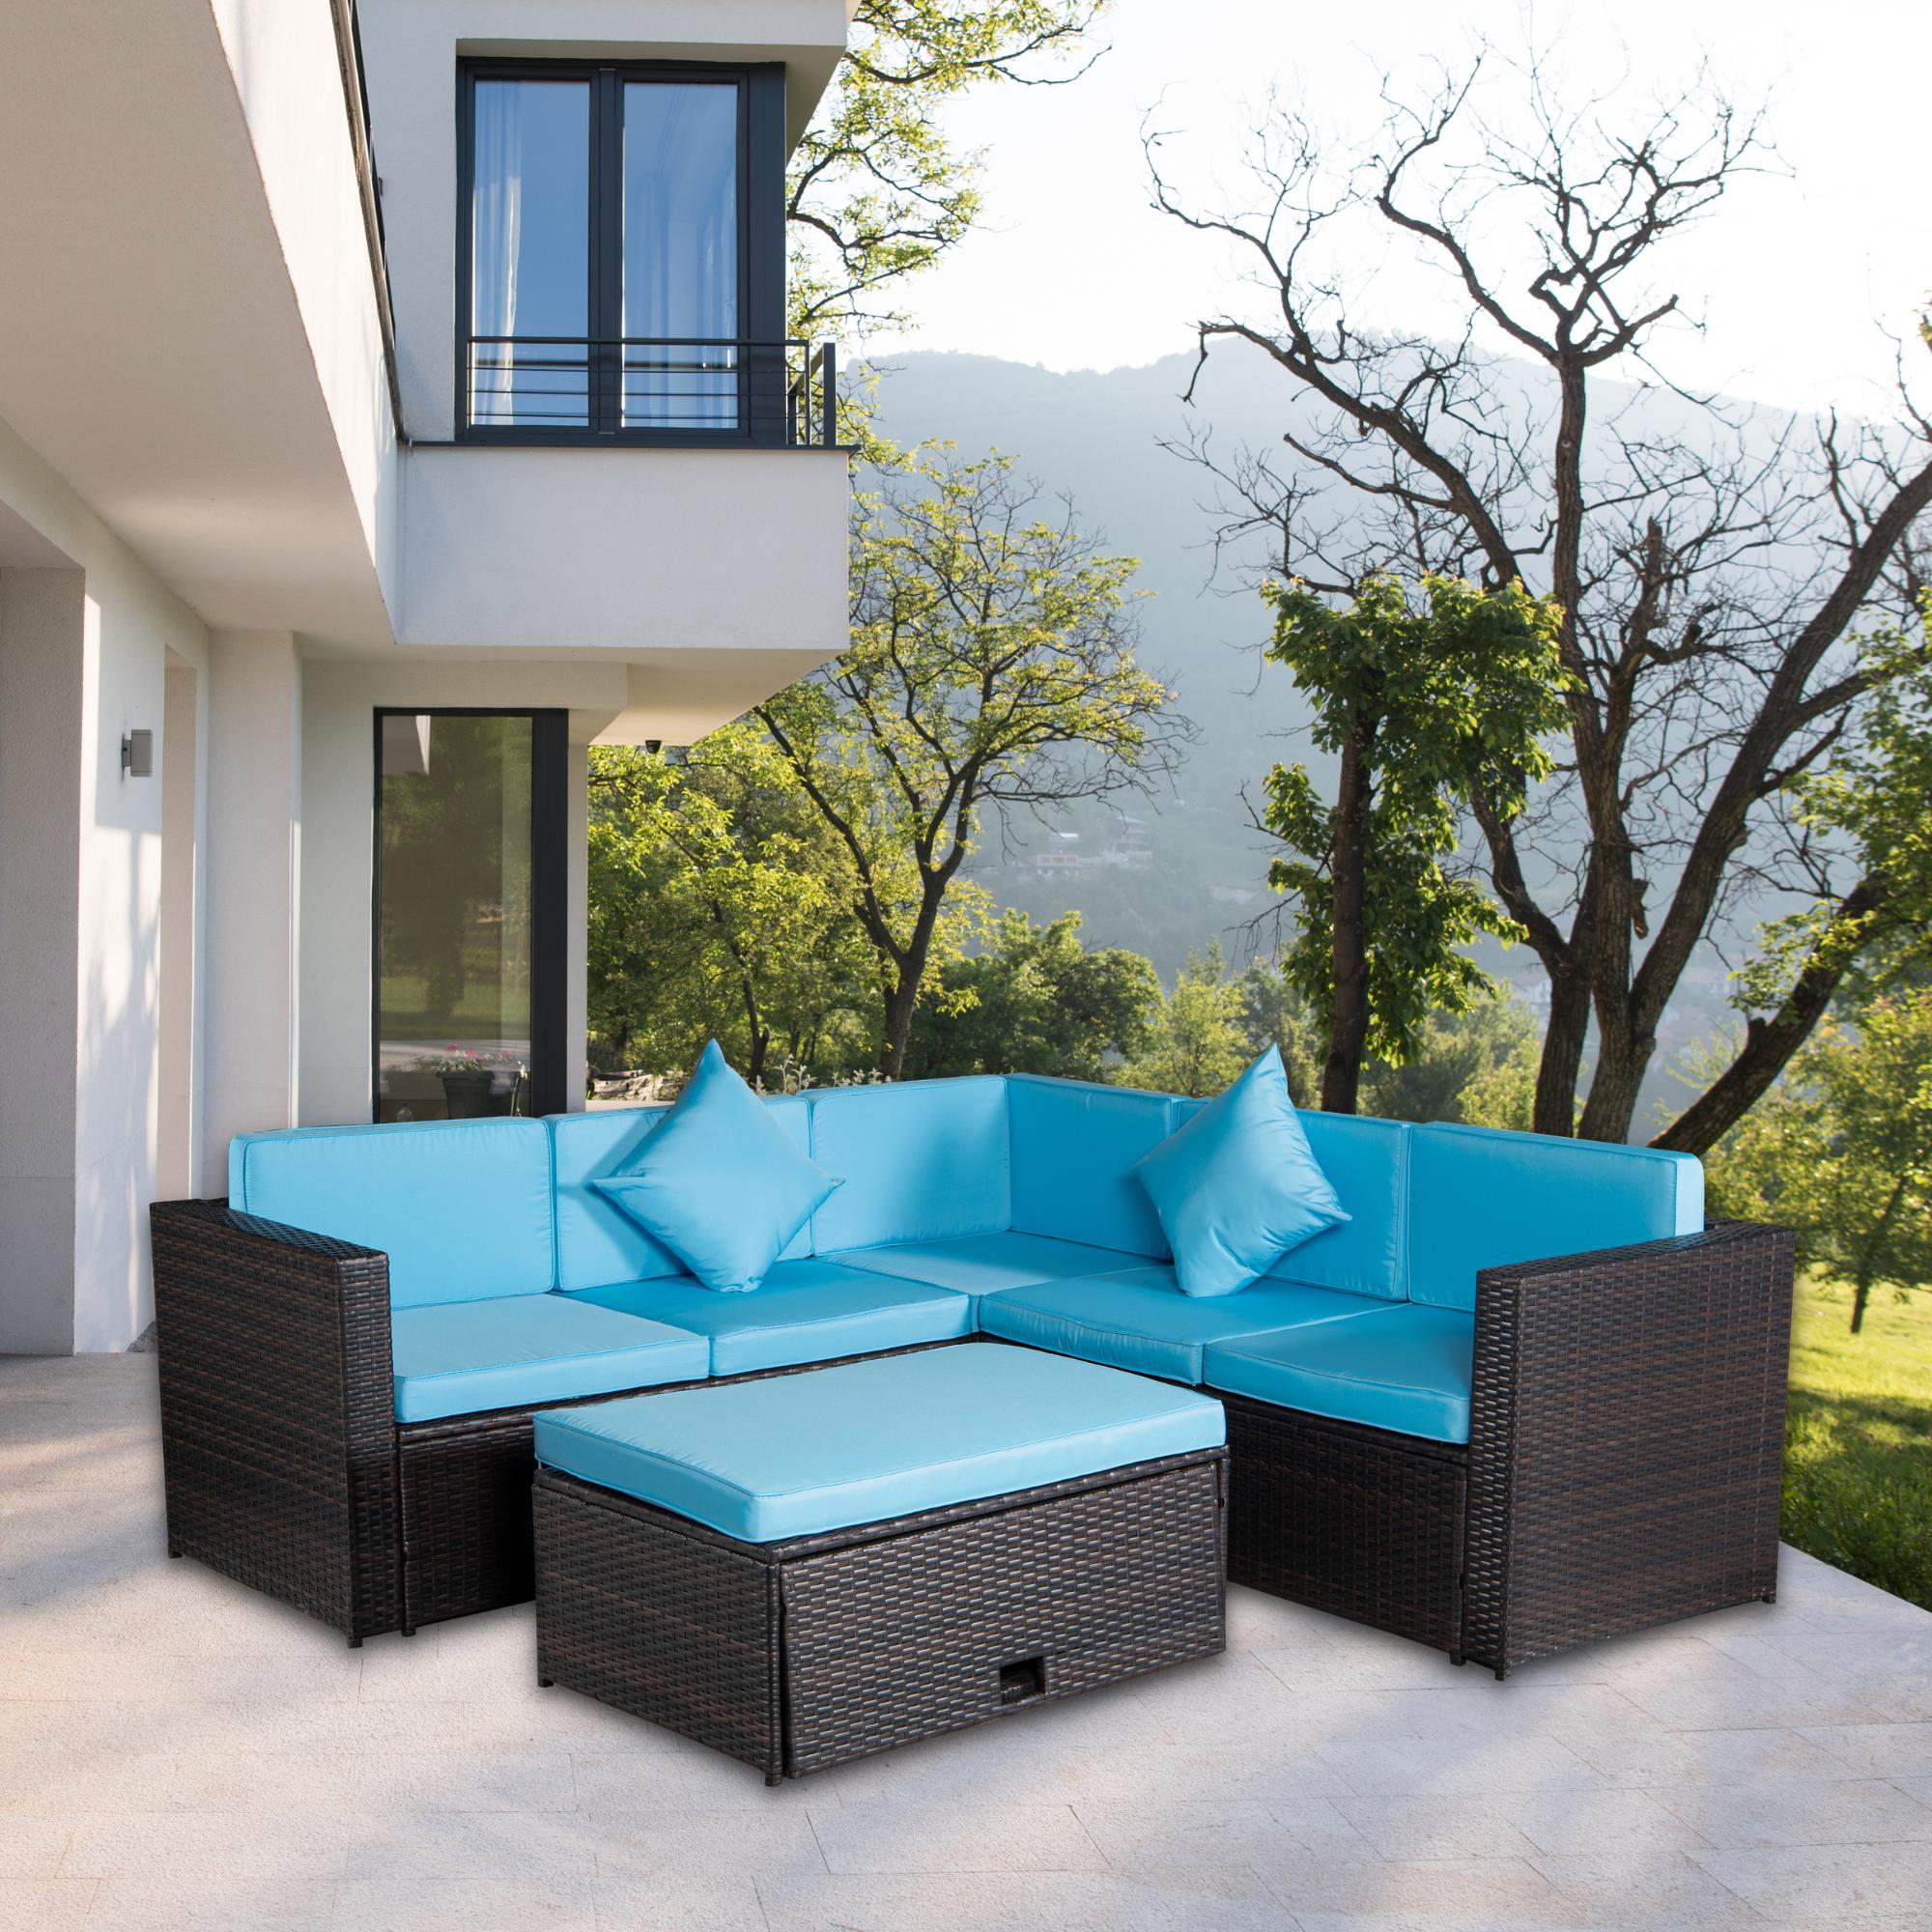 SEGMART Wicker Patio Furniture Sets, 2022 Newest 4-Piece Wicker Patio Conversation Furniture Set w/Seat Cushions & Tempered Glass Coffee, Conversation Sets for Porch Poolside Backyard Garden, S8183 - image 1 of 10